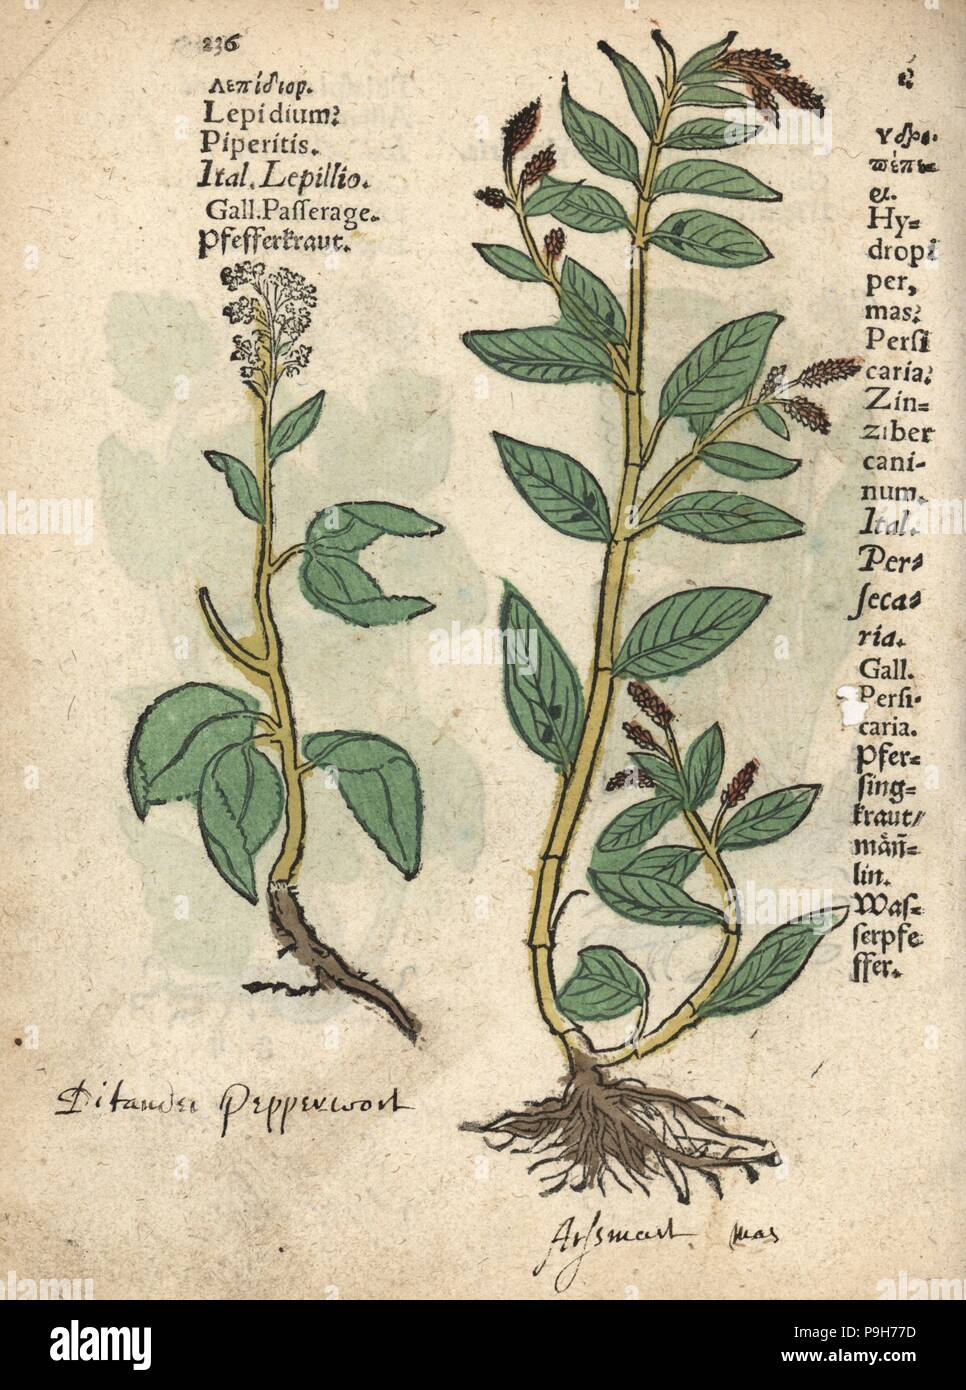 Pepperwort, Lepidium latifolium, and waterpepper, Persicaria hydropiper. Handcoloured woodblock engraving of a botanical illustration from Adam Lonicer's Krauterbuch, or Herbal, Frankfurt, 1557. This from a 17th century pirate edition or atlas of illustrations only, with captions in Latin, Greek, French, Italian, German, and in English manuscript. Stock Photo